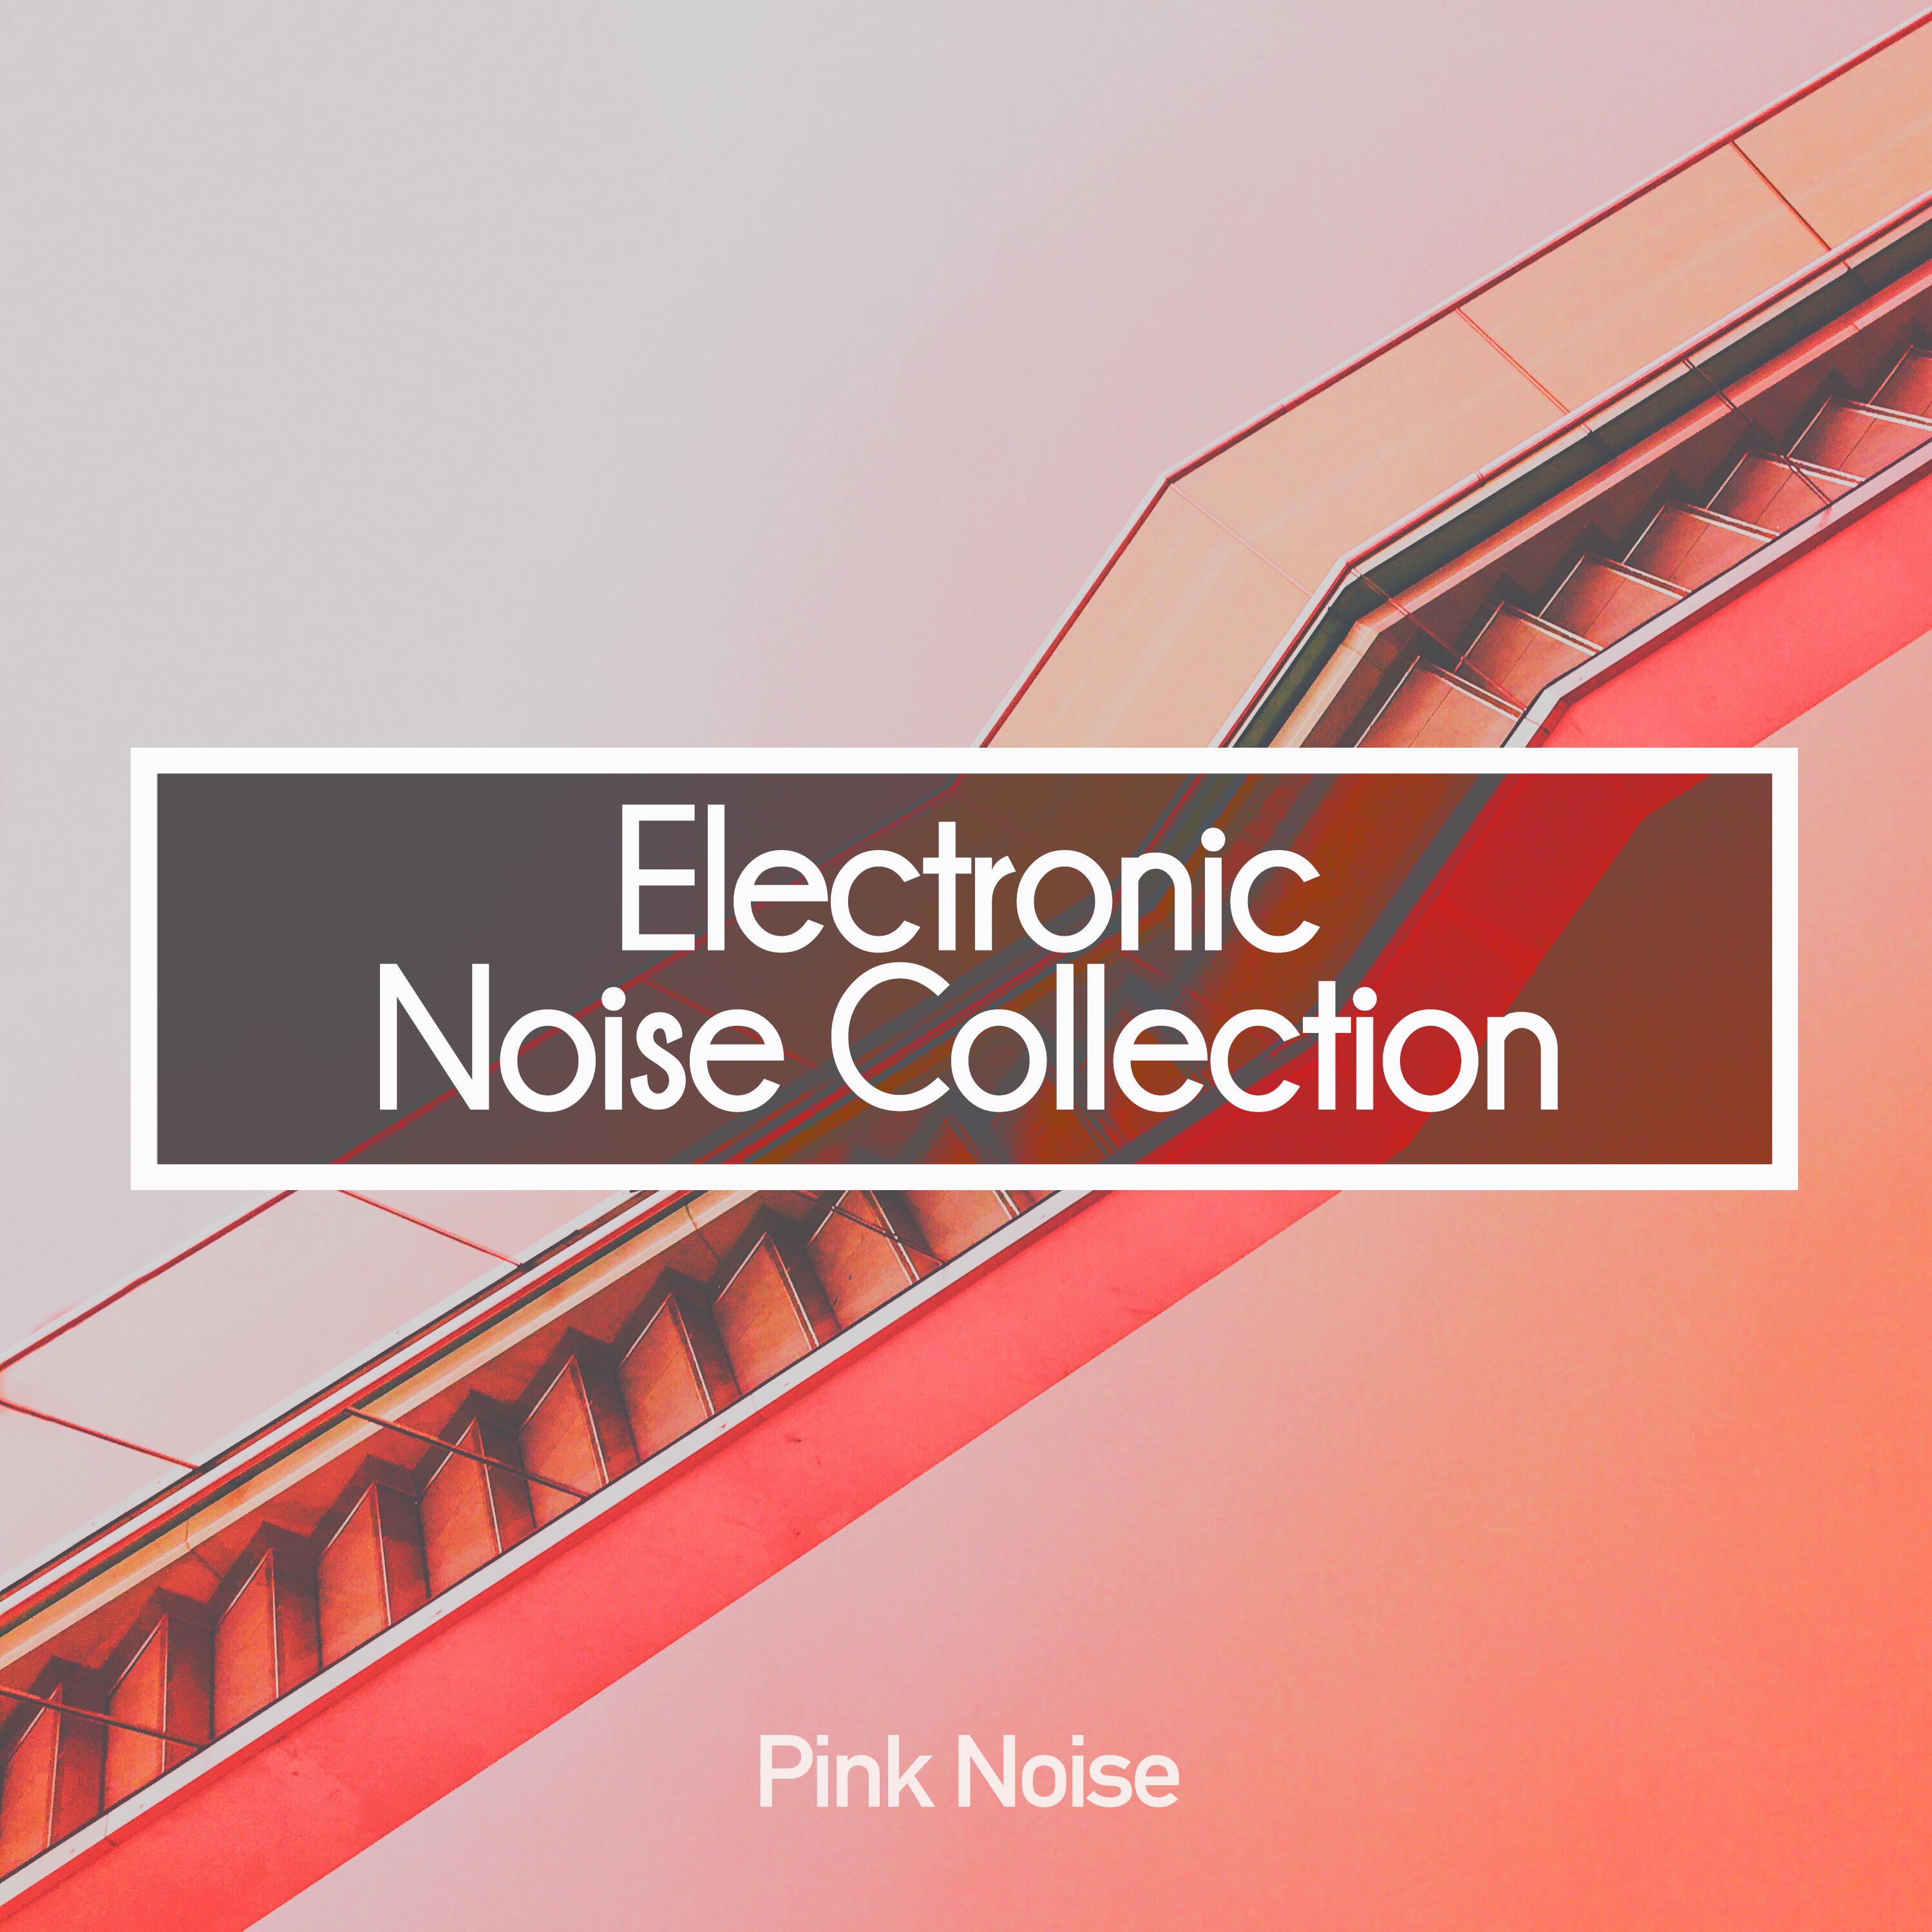 Electronic Noise Collection